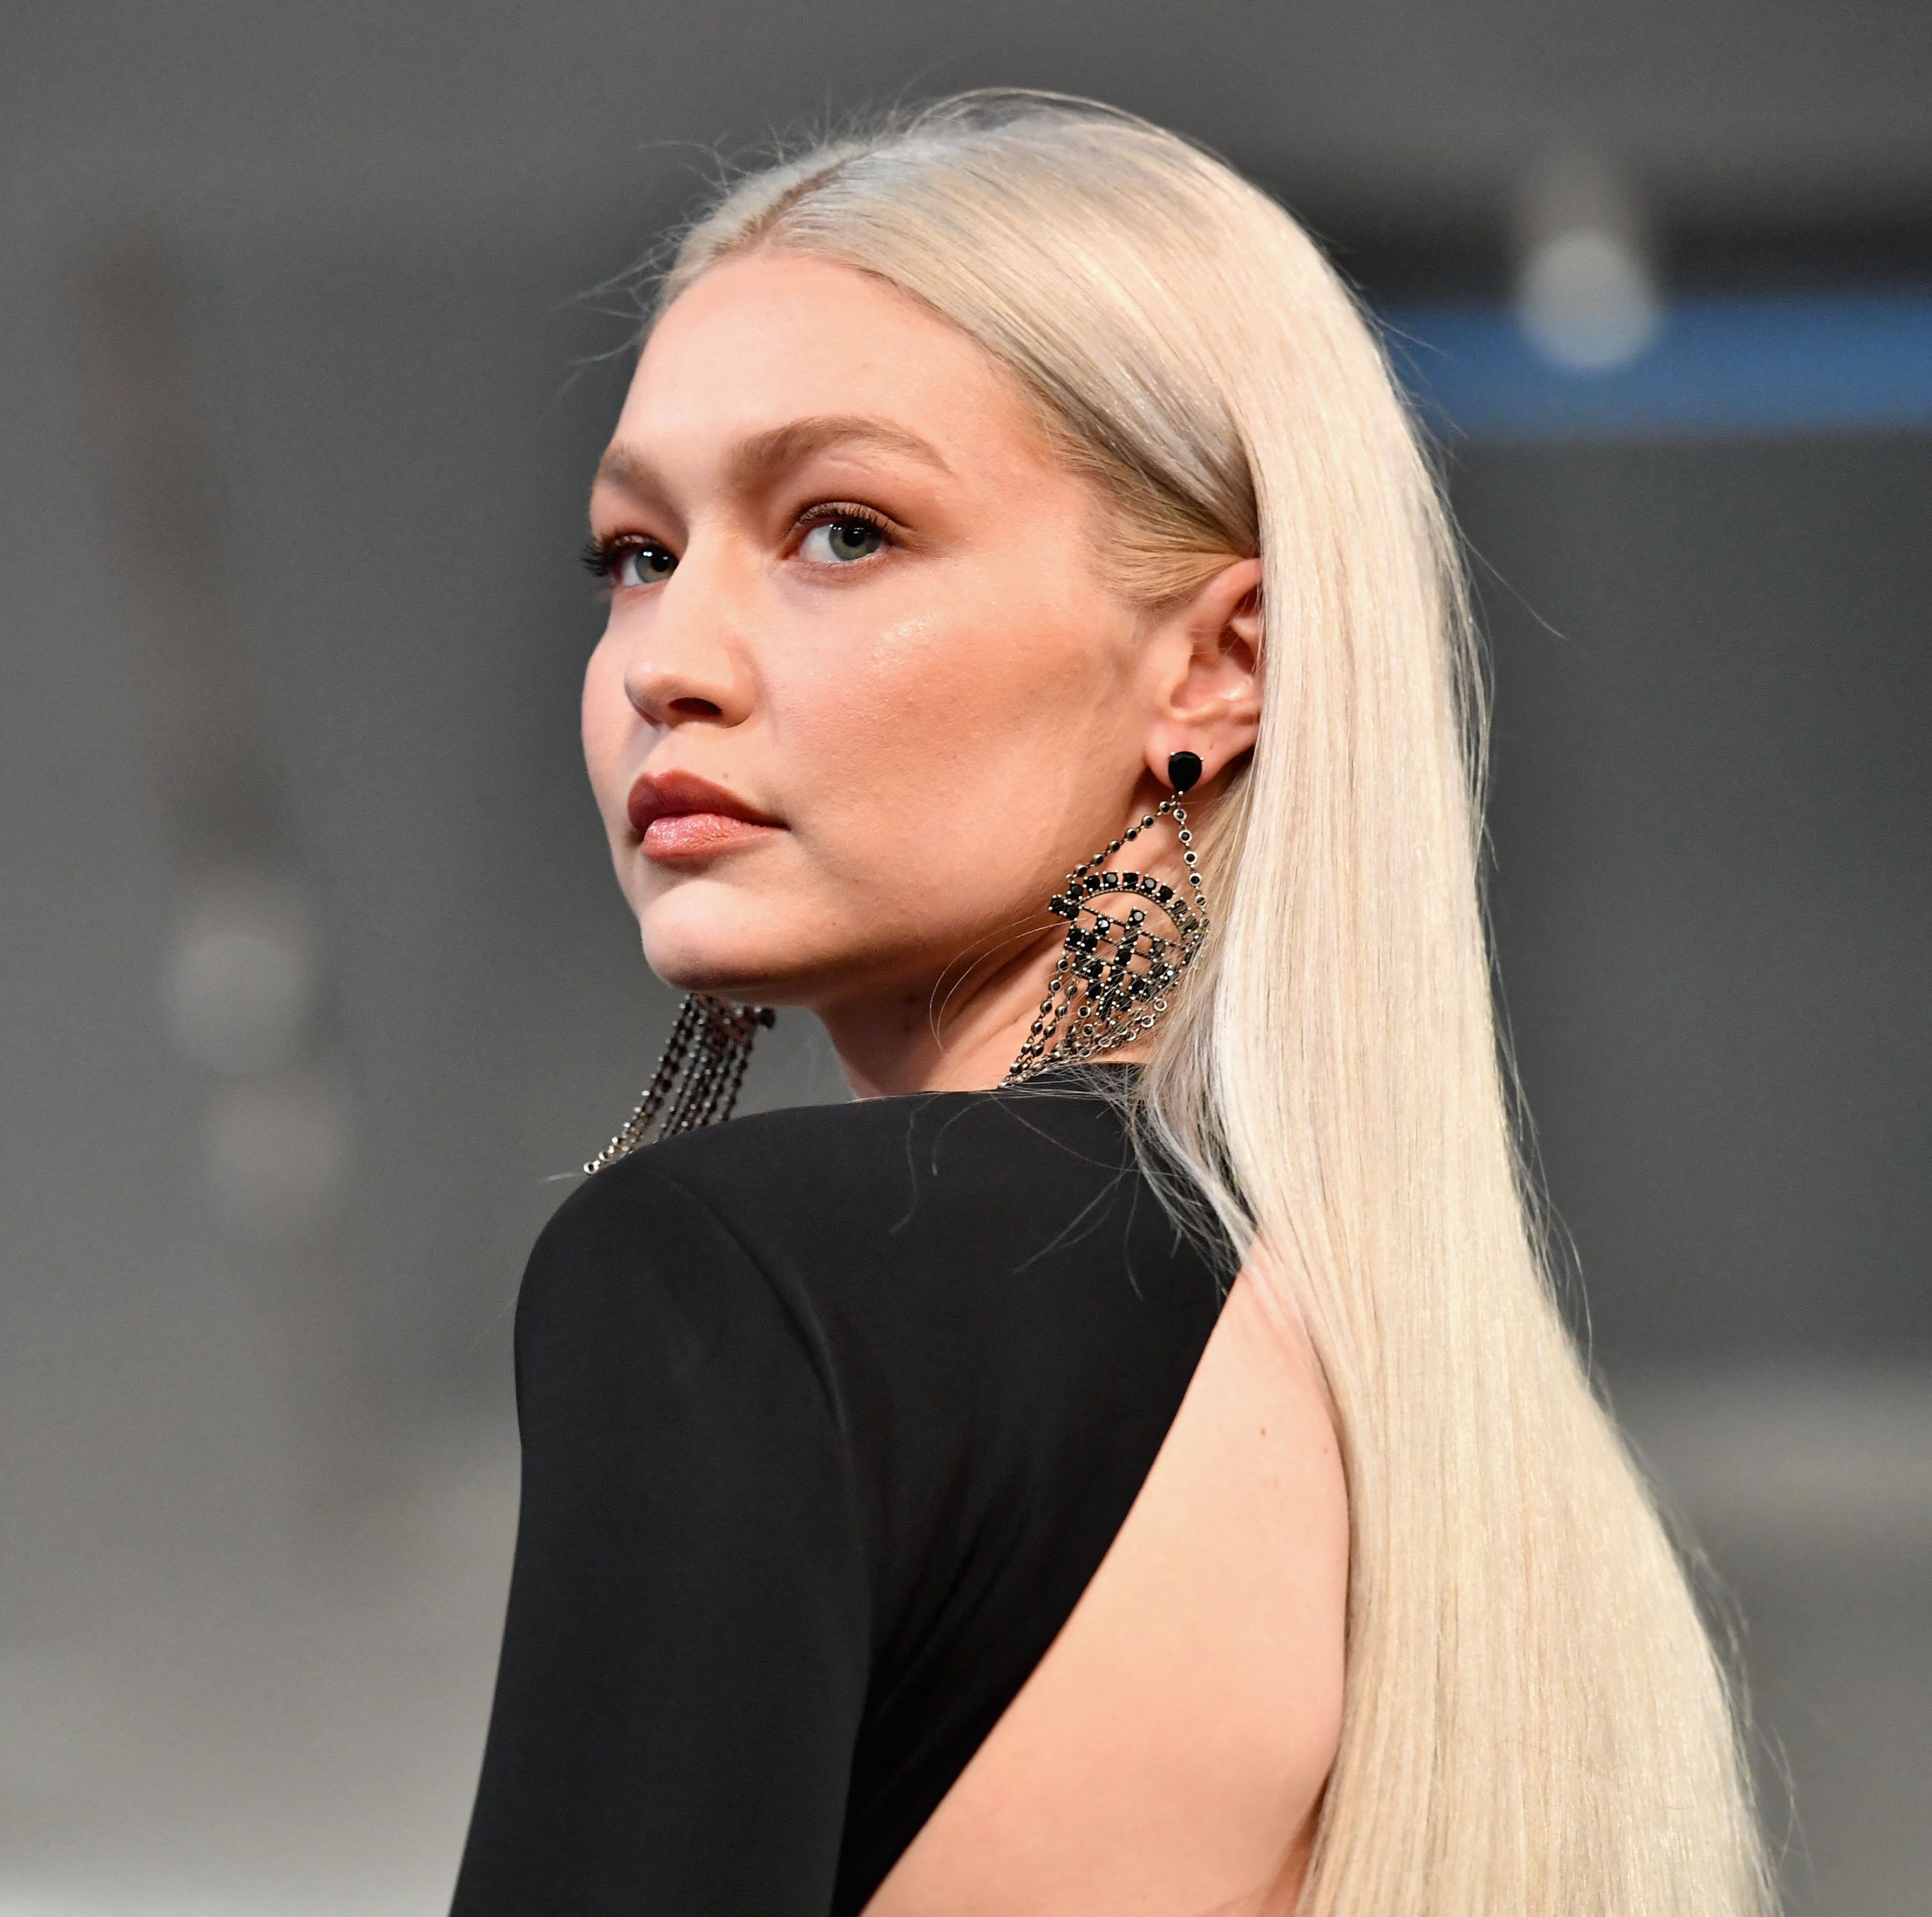 Gigi Hadid Deleted Her Twitter Account After Elon Musk's Buyout